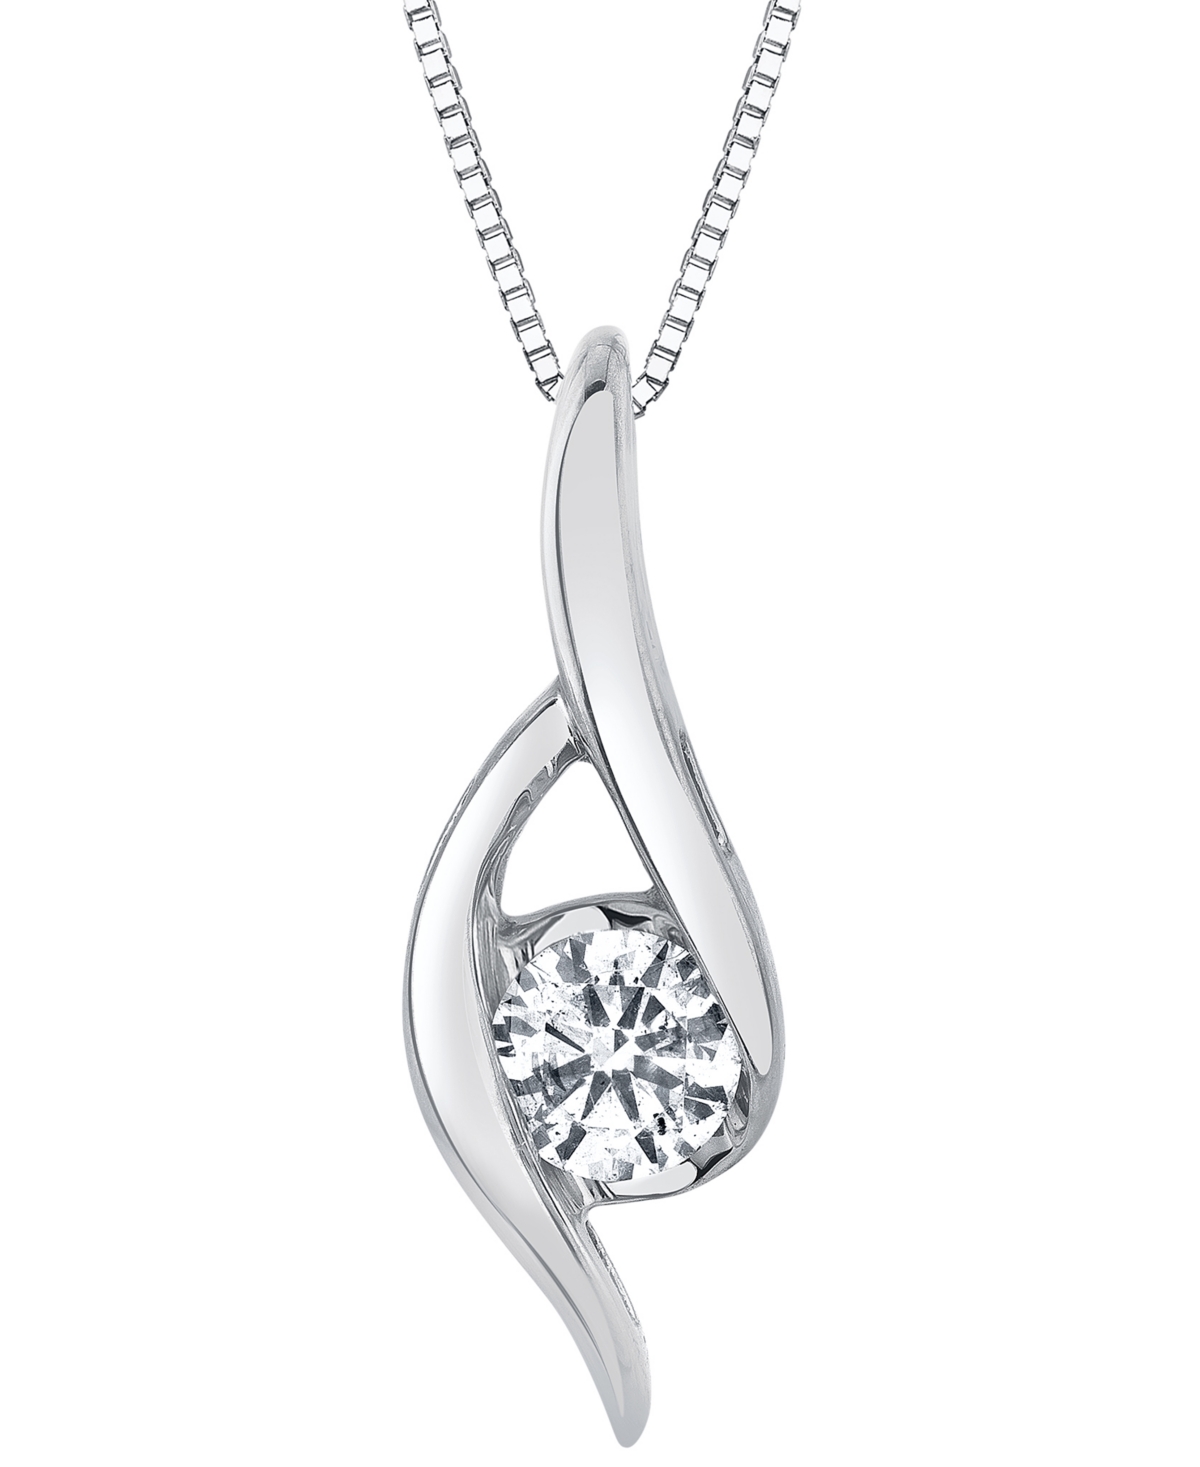 Diamond Swirl Solitaire Pendant Necklace (1/4 ct. t.w.) in 14K White Gold or 14K Yellow Gold - White Gold